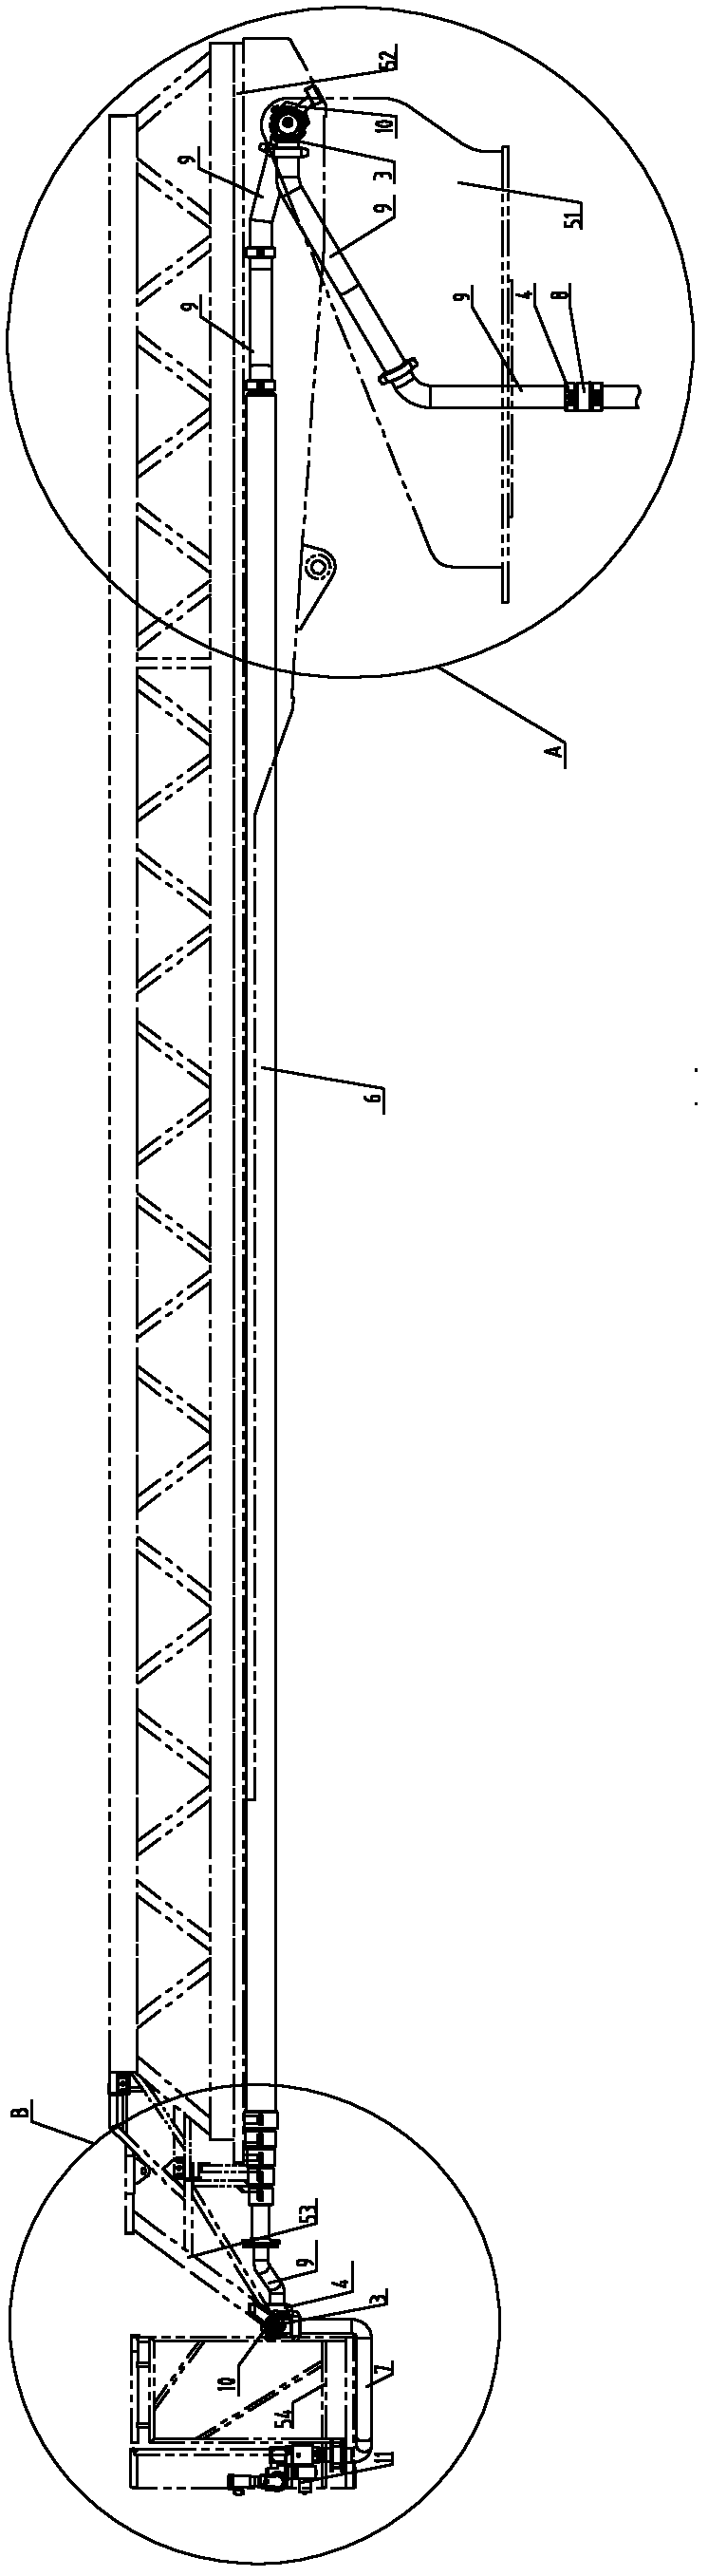 Water pipeline connecting structure for fire truck and fire truck with same